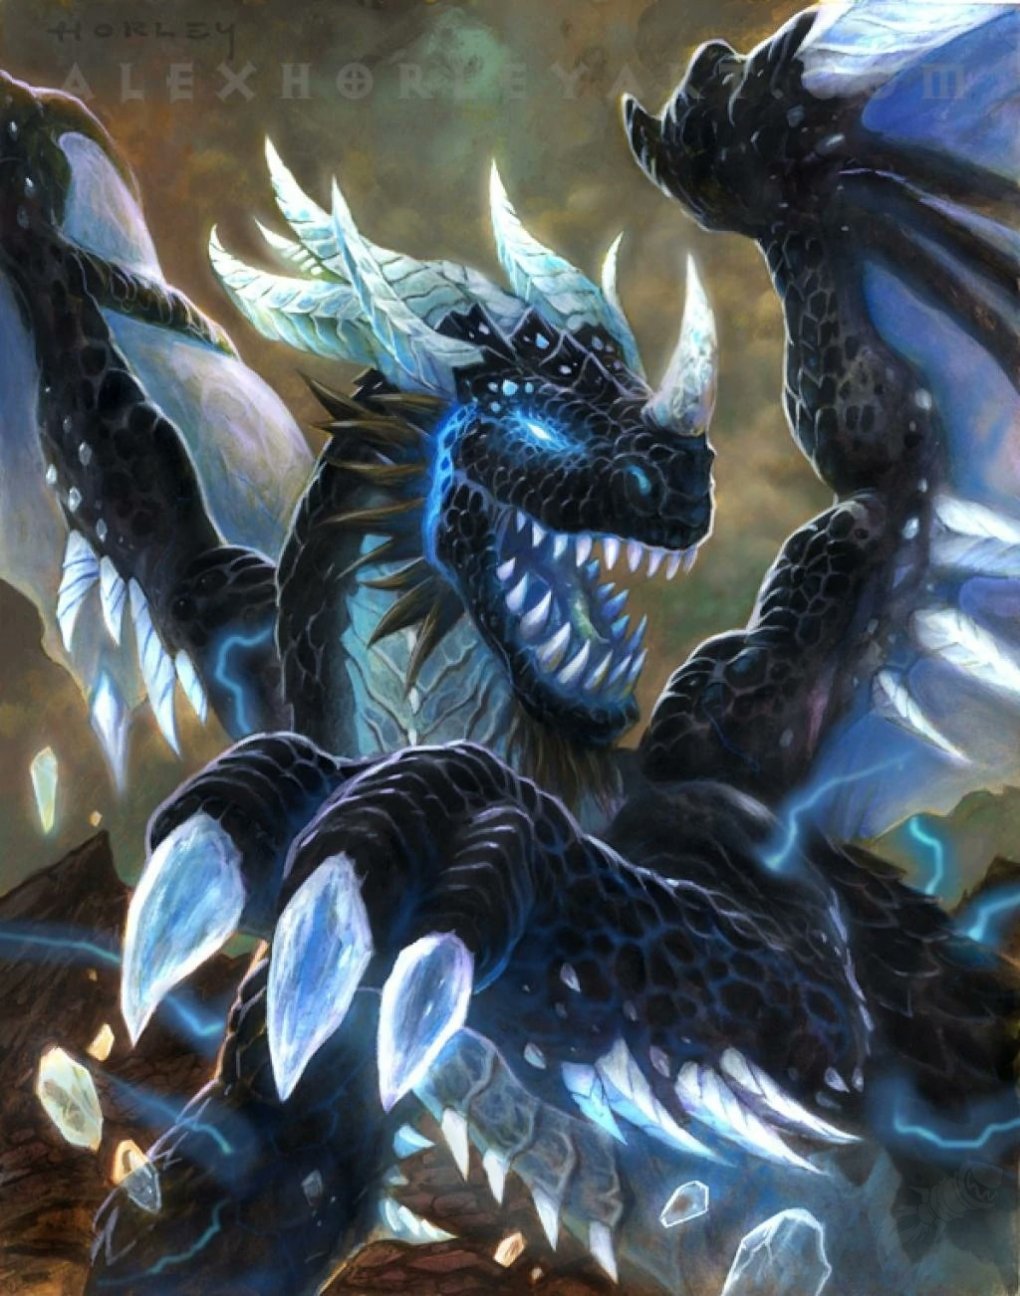 Murozond is the leader of the Infinite Dragonflight.  Does he serve a master or does the dragon in Dragonflight have plans of his own?